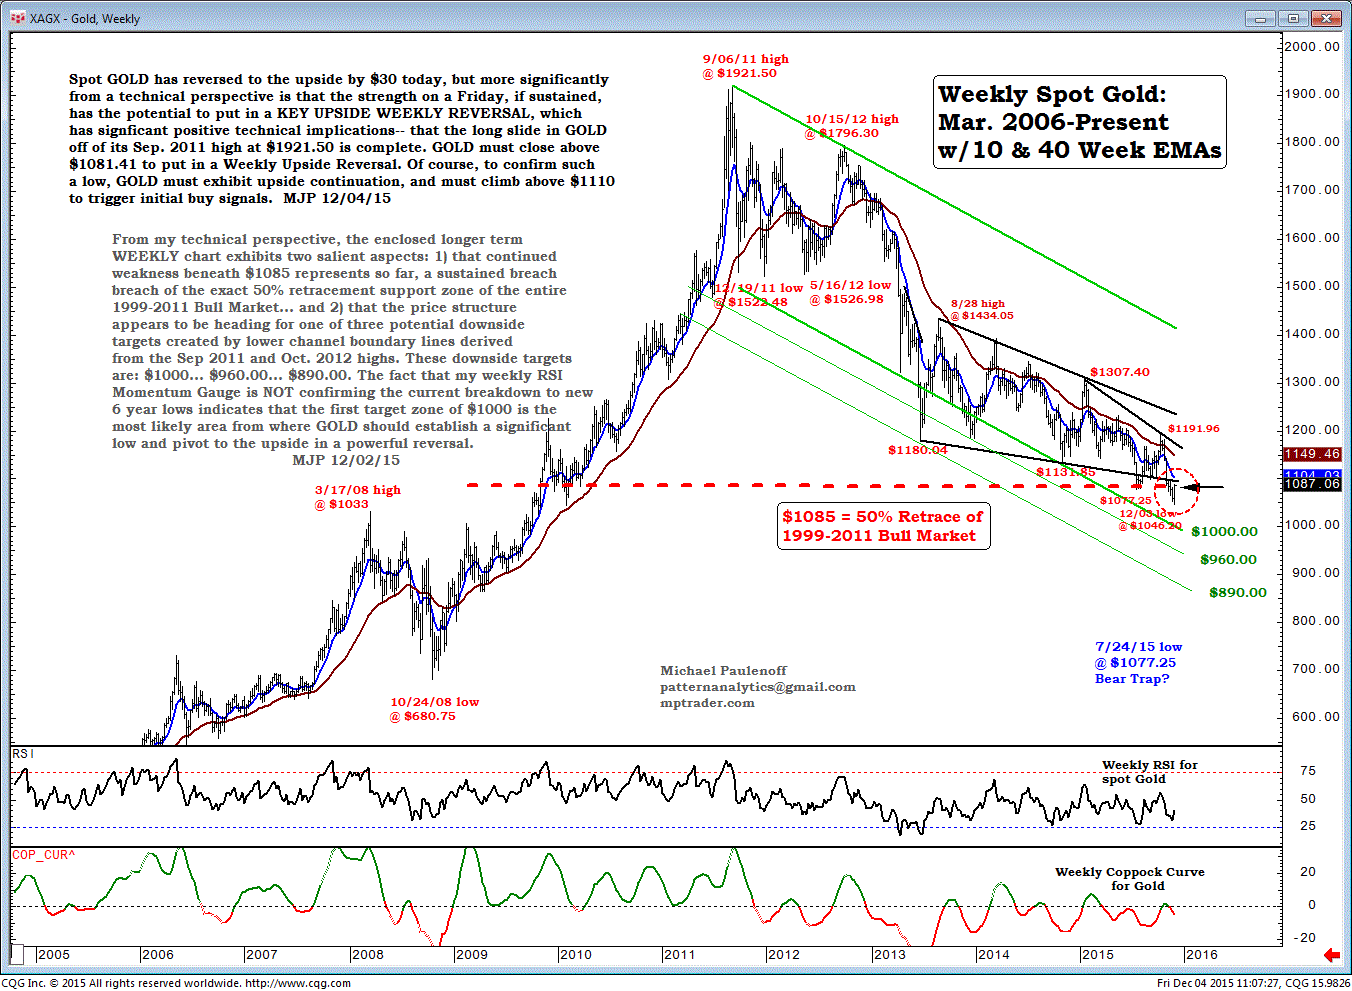 Weekly Spot Gold - March 2006-Present